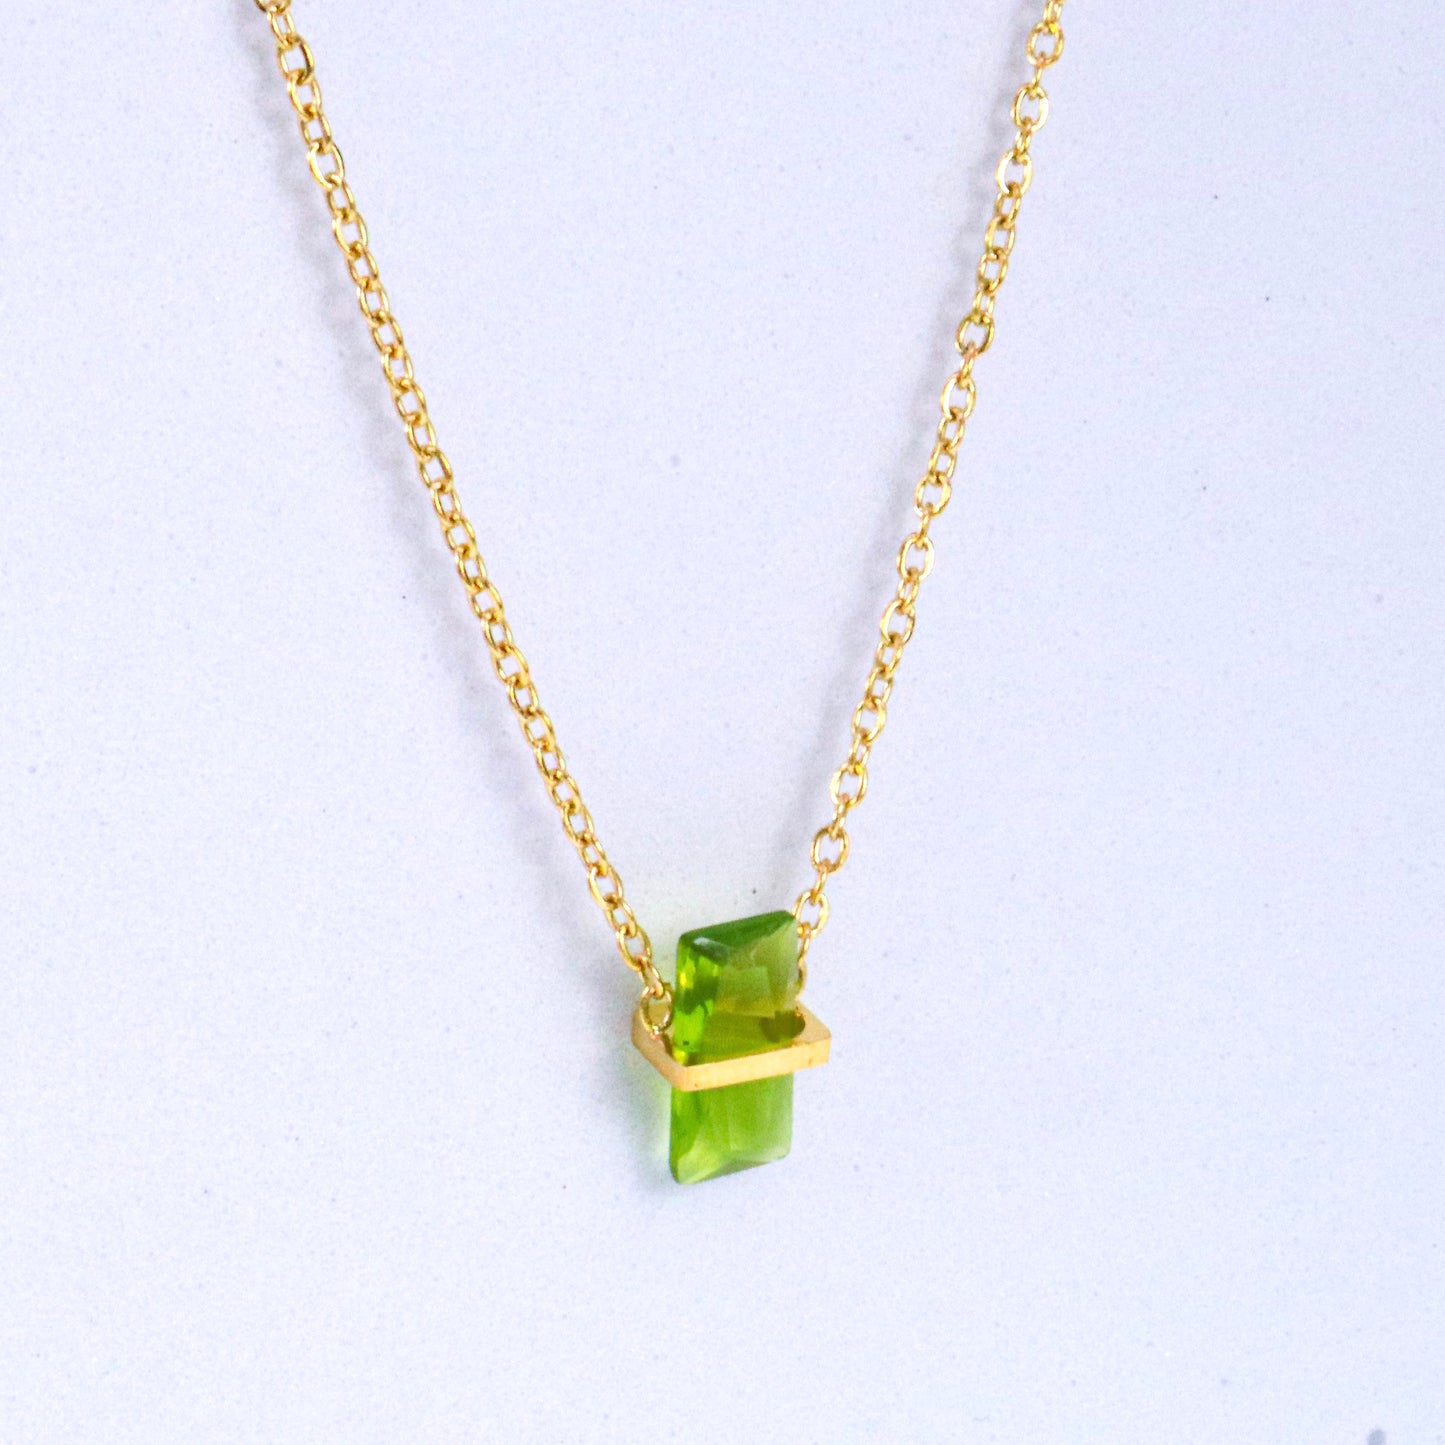 Green Peridot Crystal August Birthstone Necklace